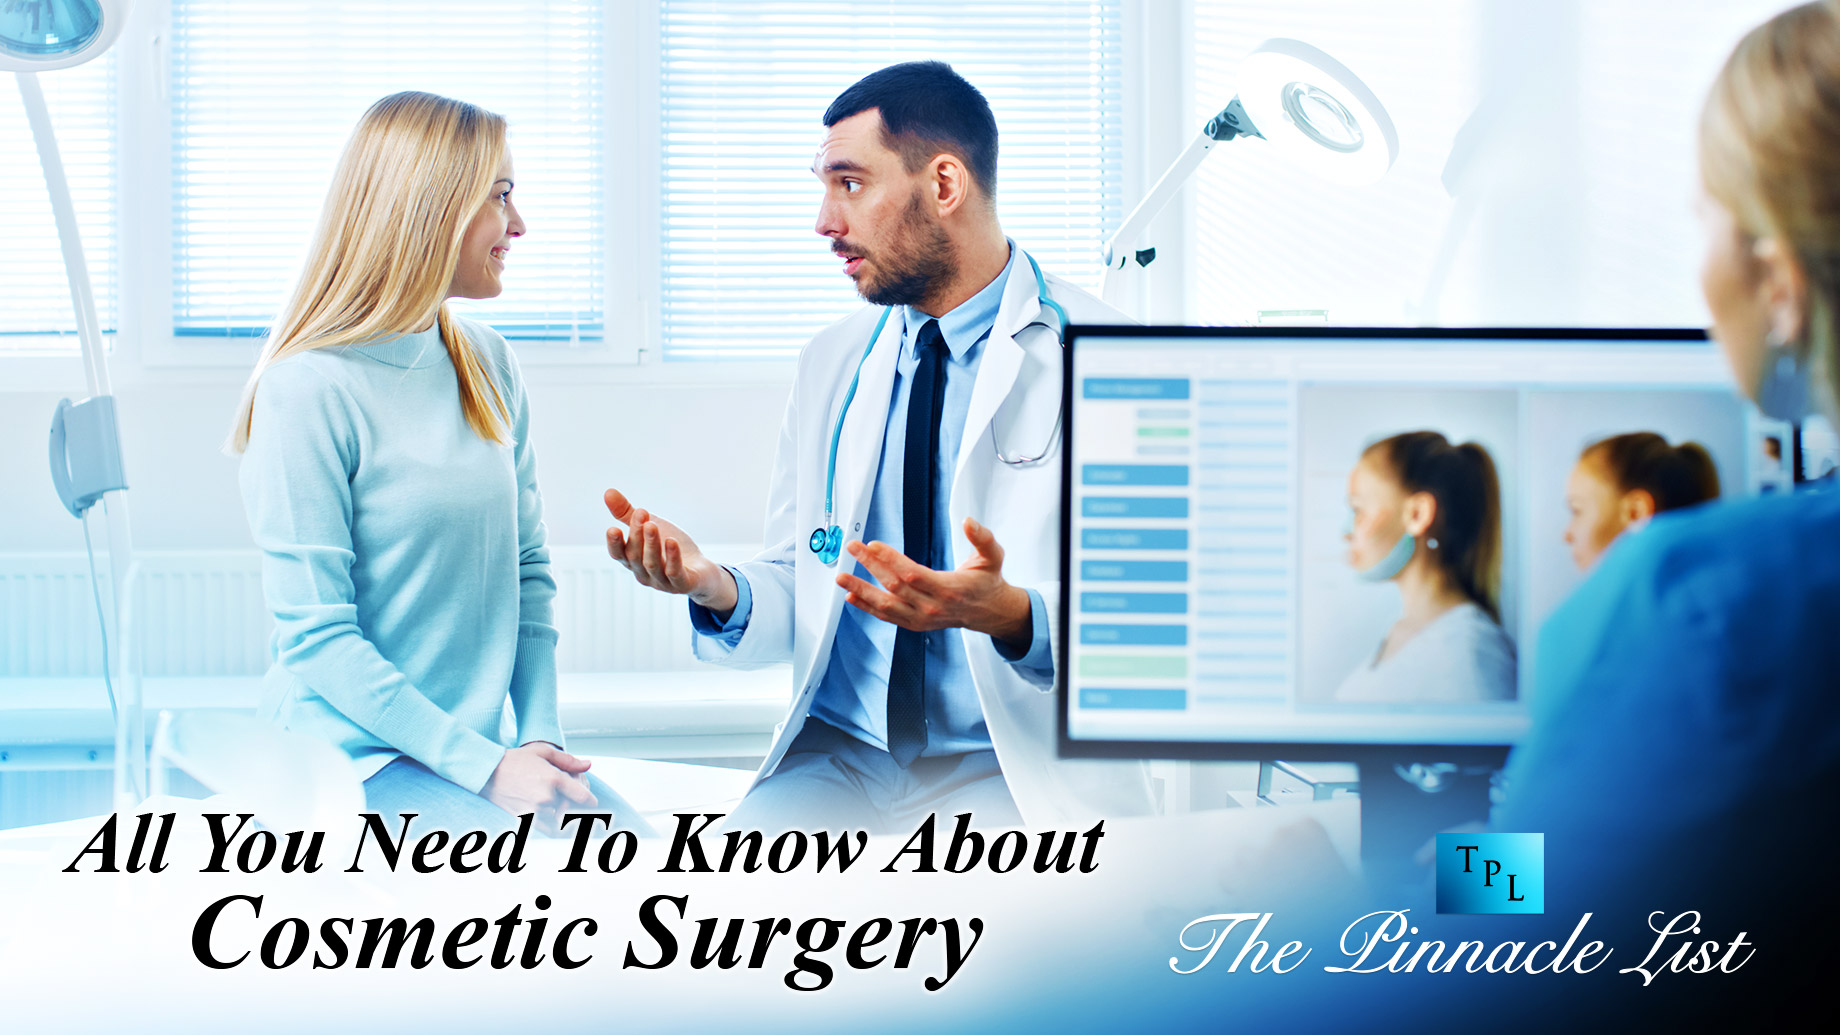 All You Need To Know About Cosmetic Surgery